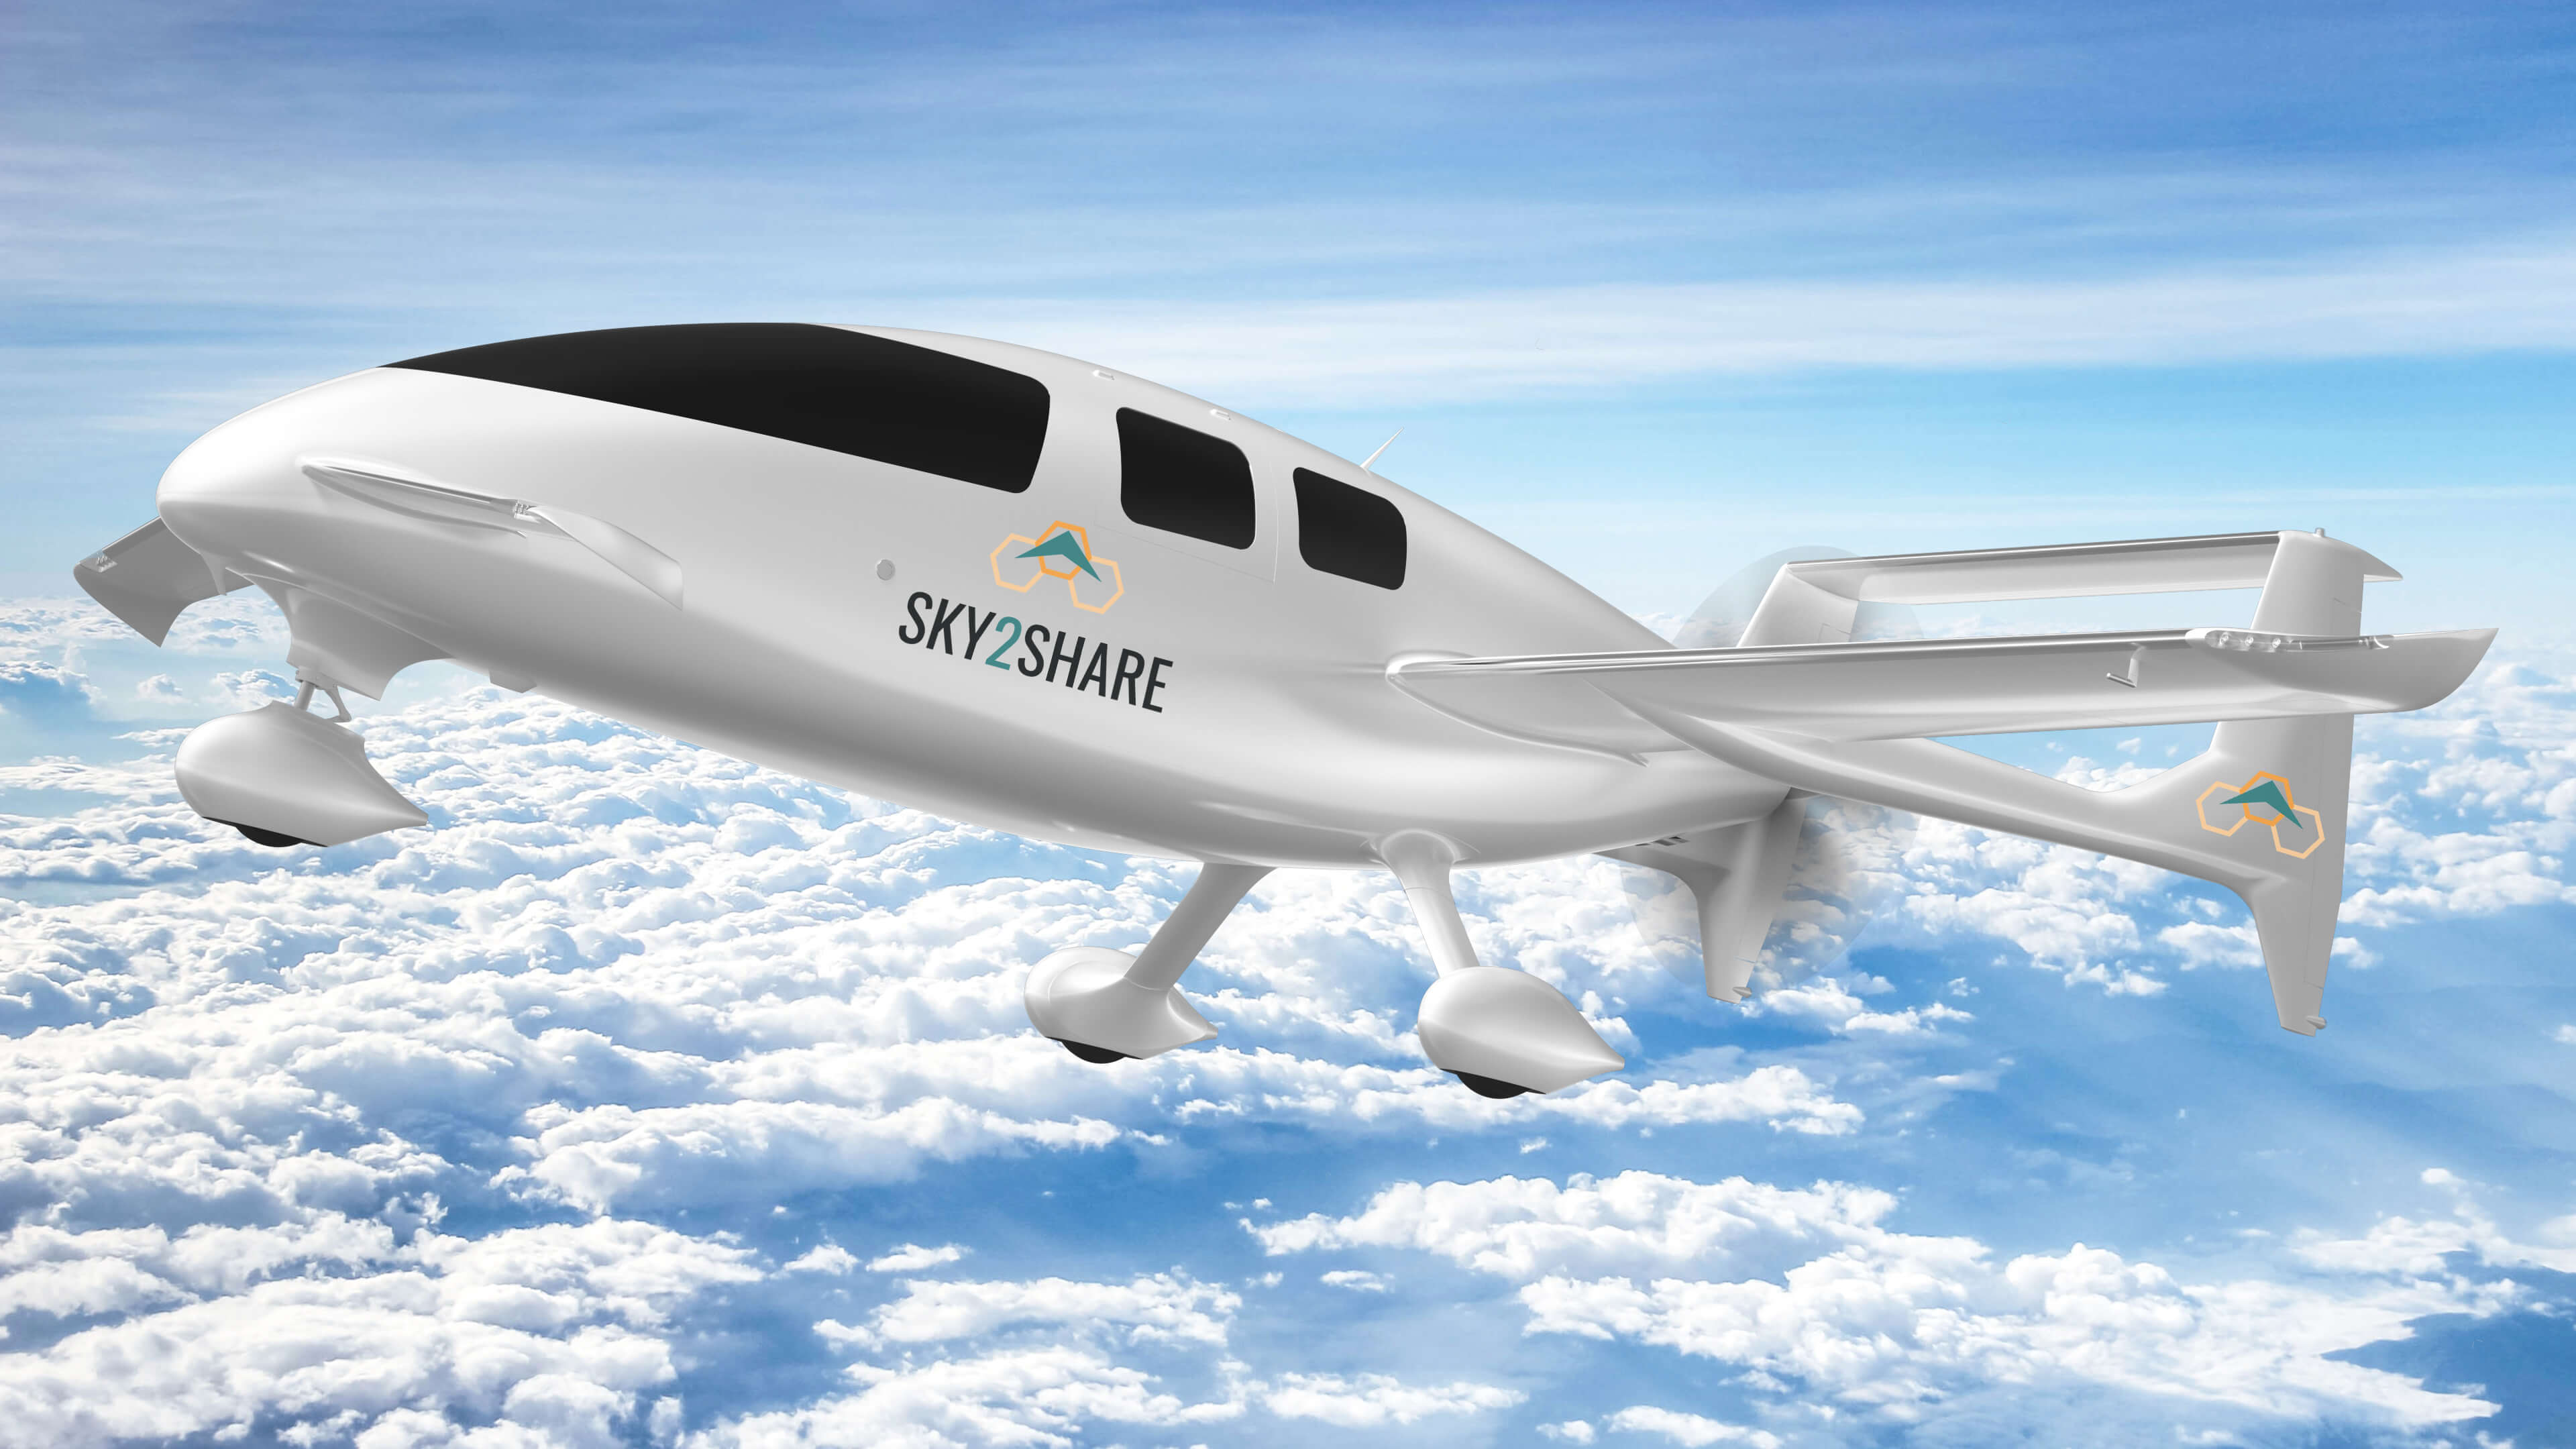 VoltAero signs MOU with Sky2Share for 15 aircraft